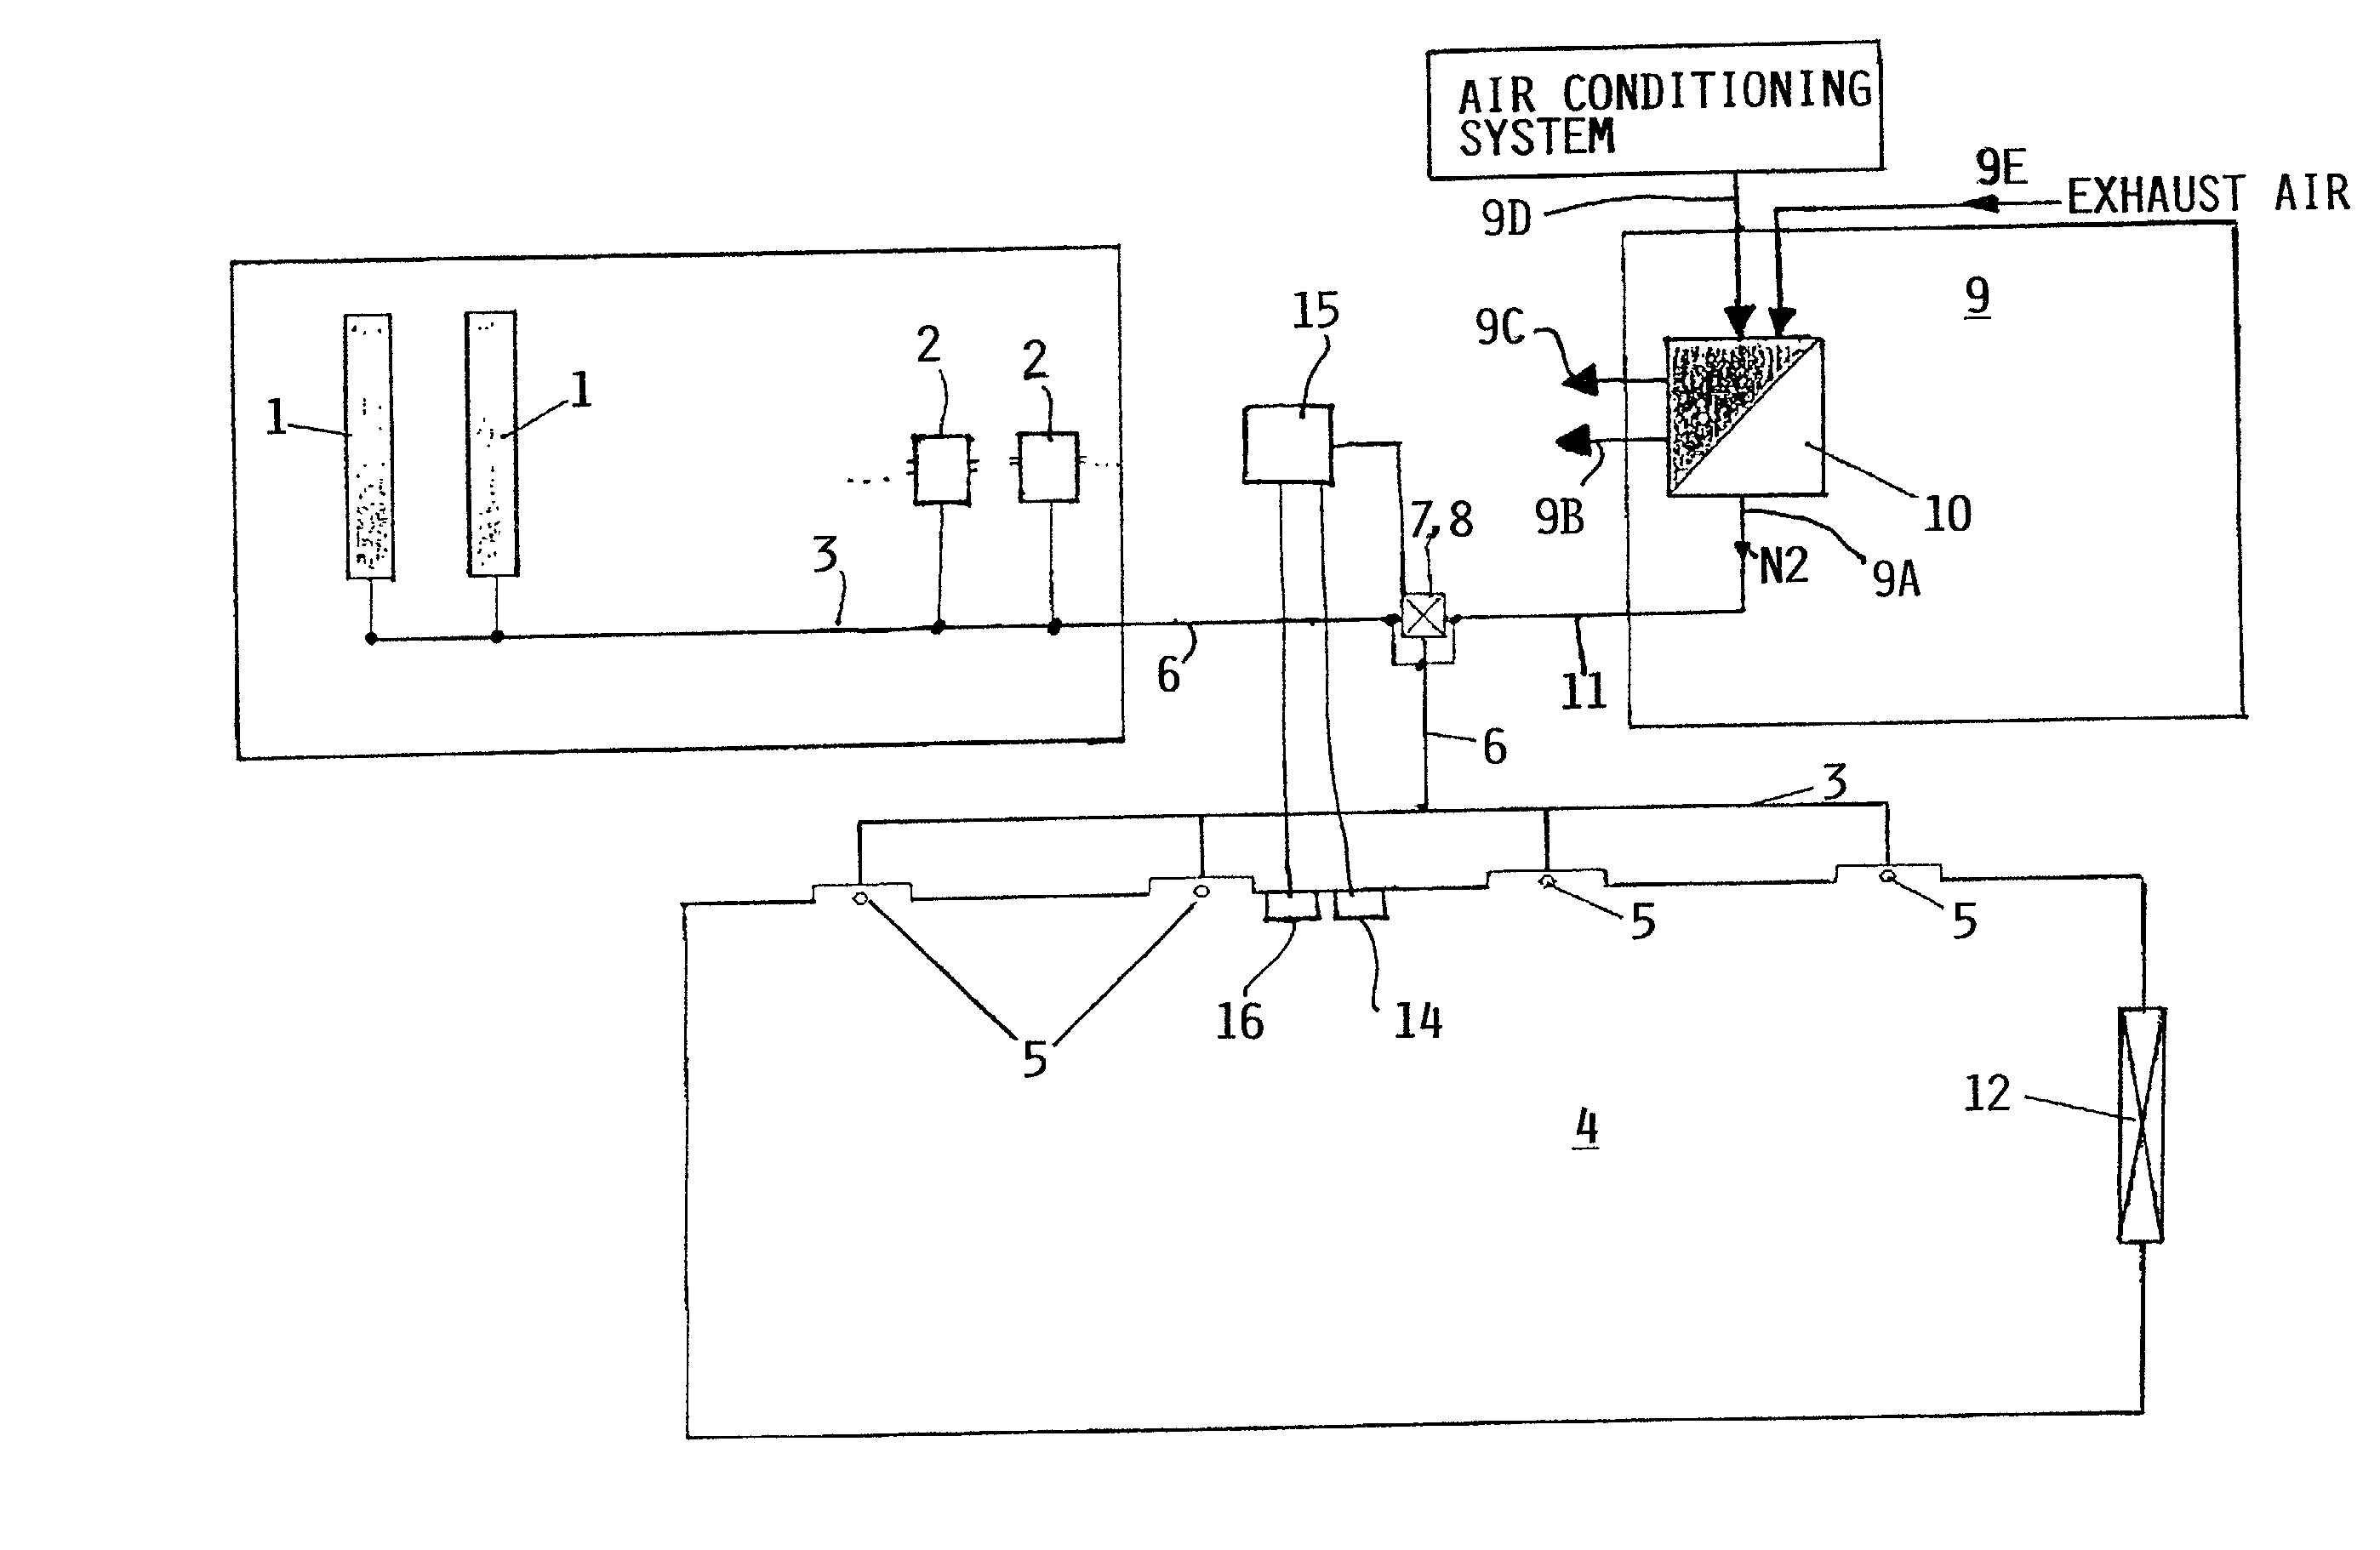 Method and system for extinguishing fire in an enclosed space